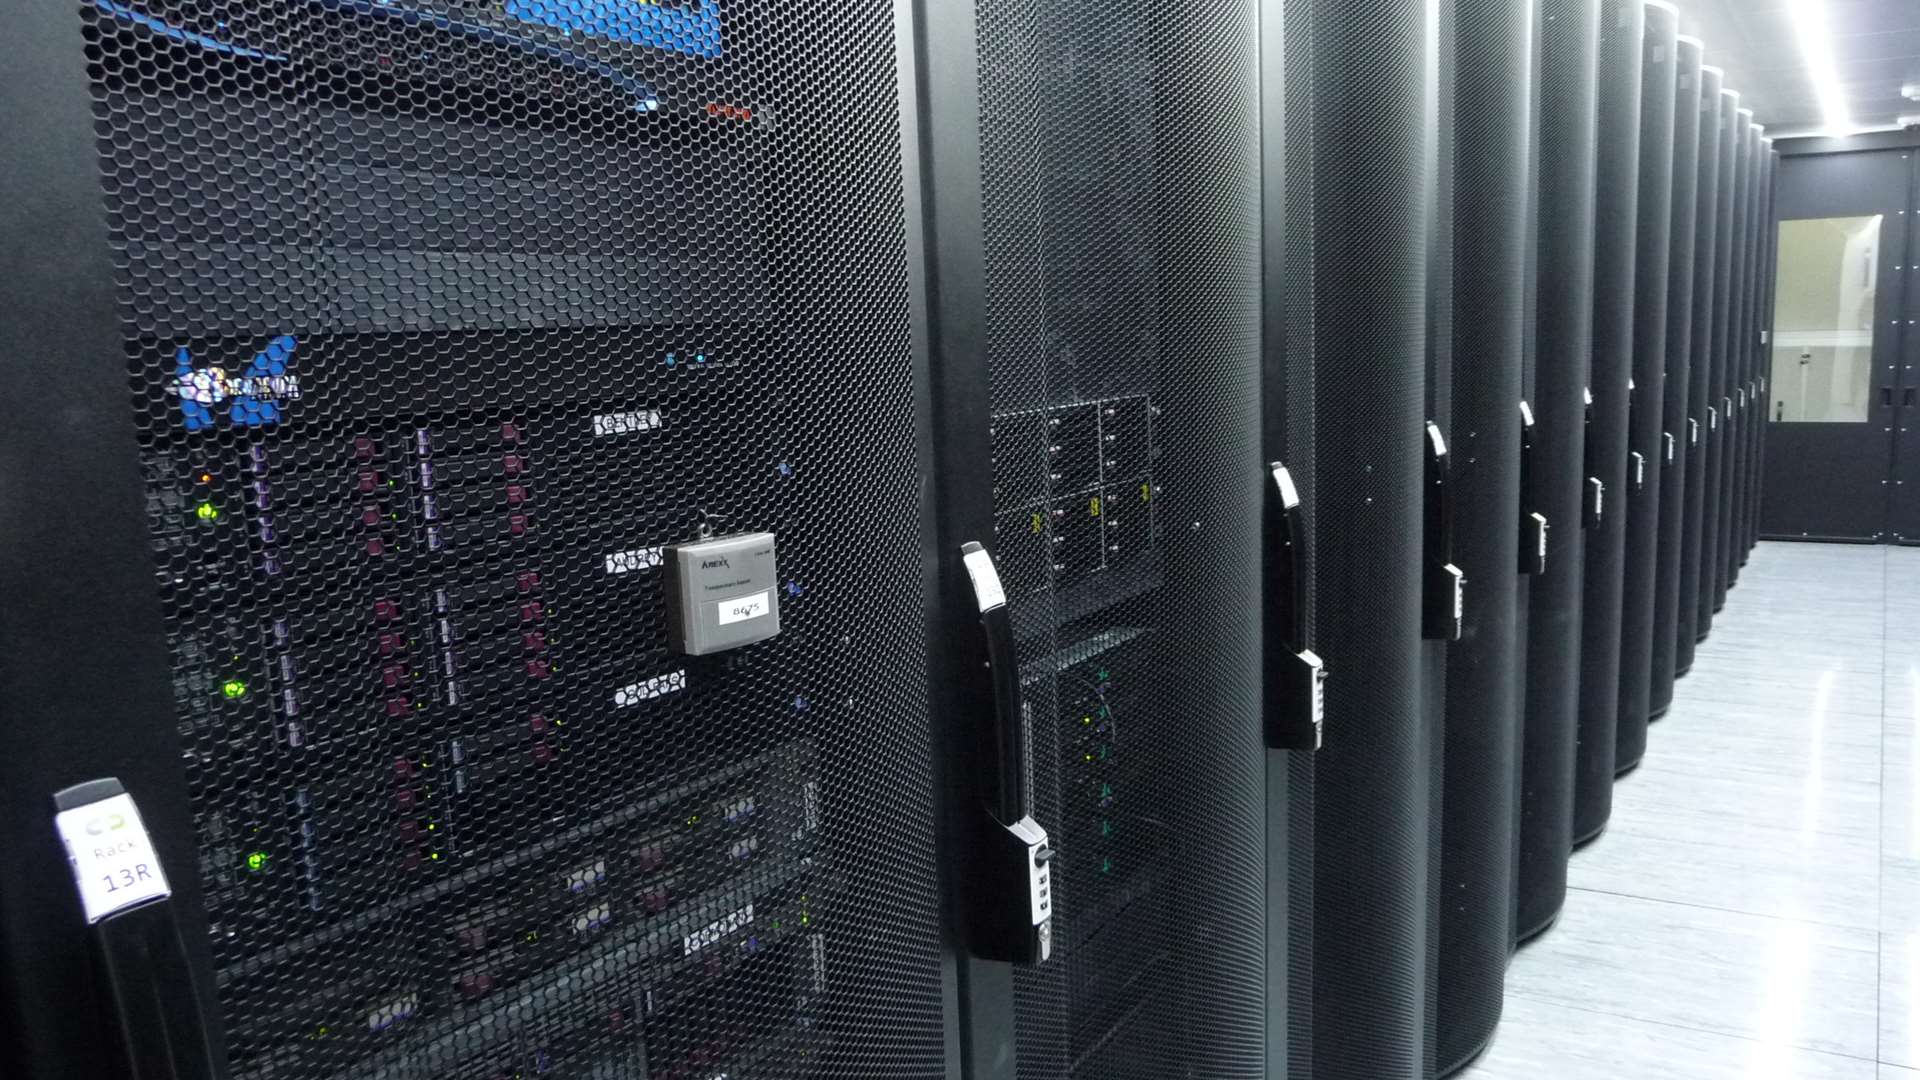 Custodian Data Centres has increased its capacity from 6,000 servers to 16,000